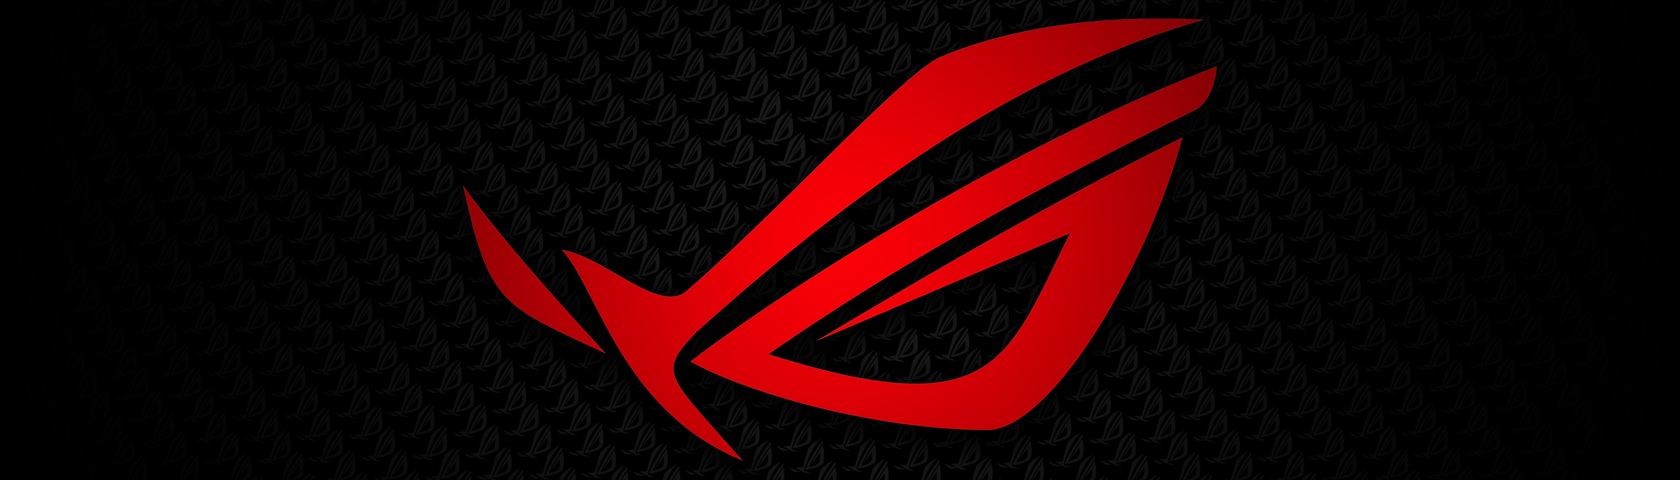 Asus Republic Of Gamers ROG Images WallpaperFusion By Binary